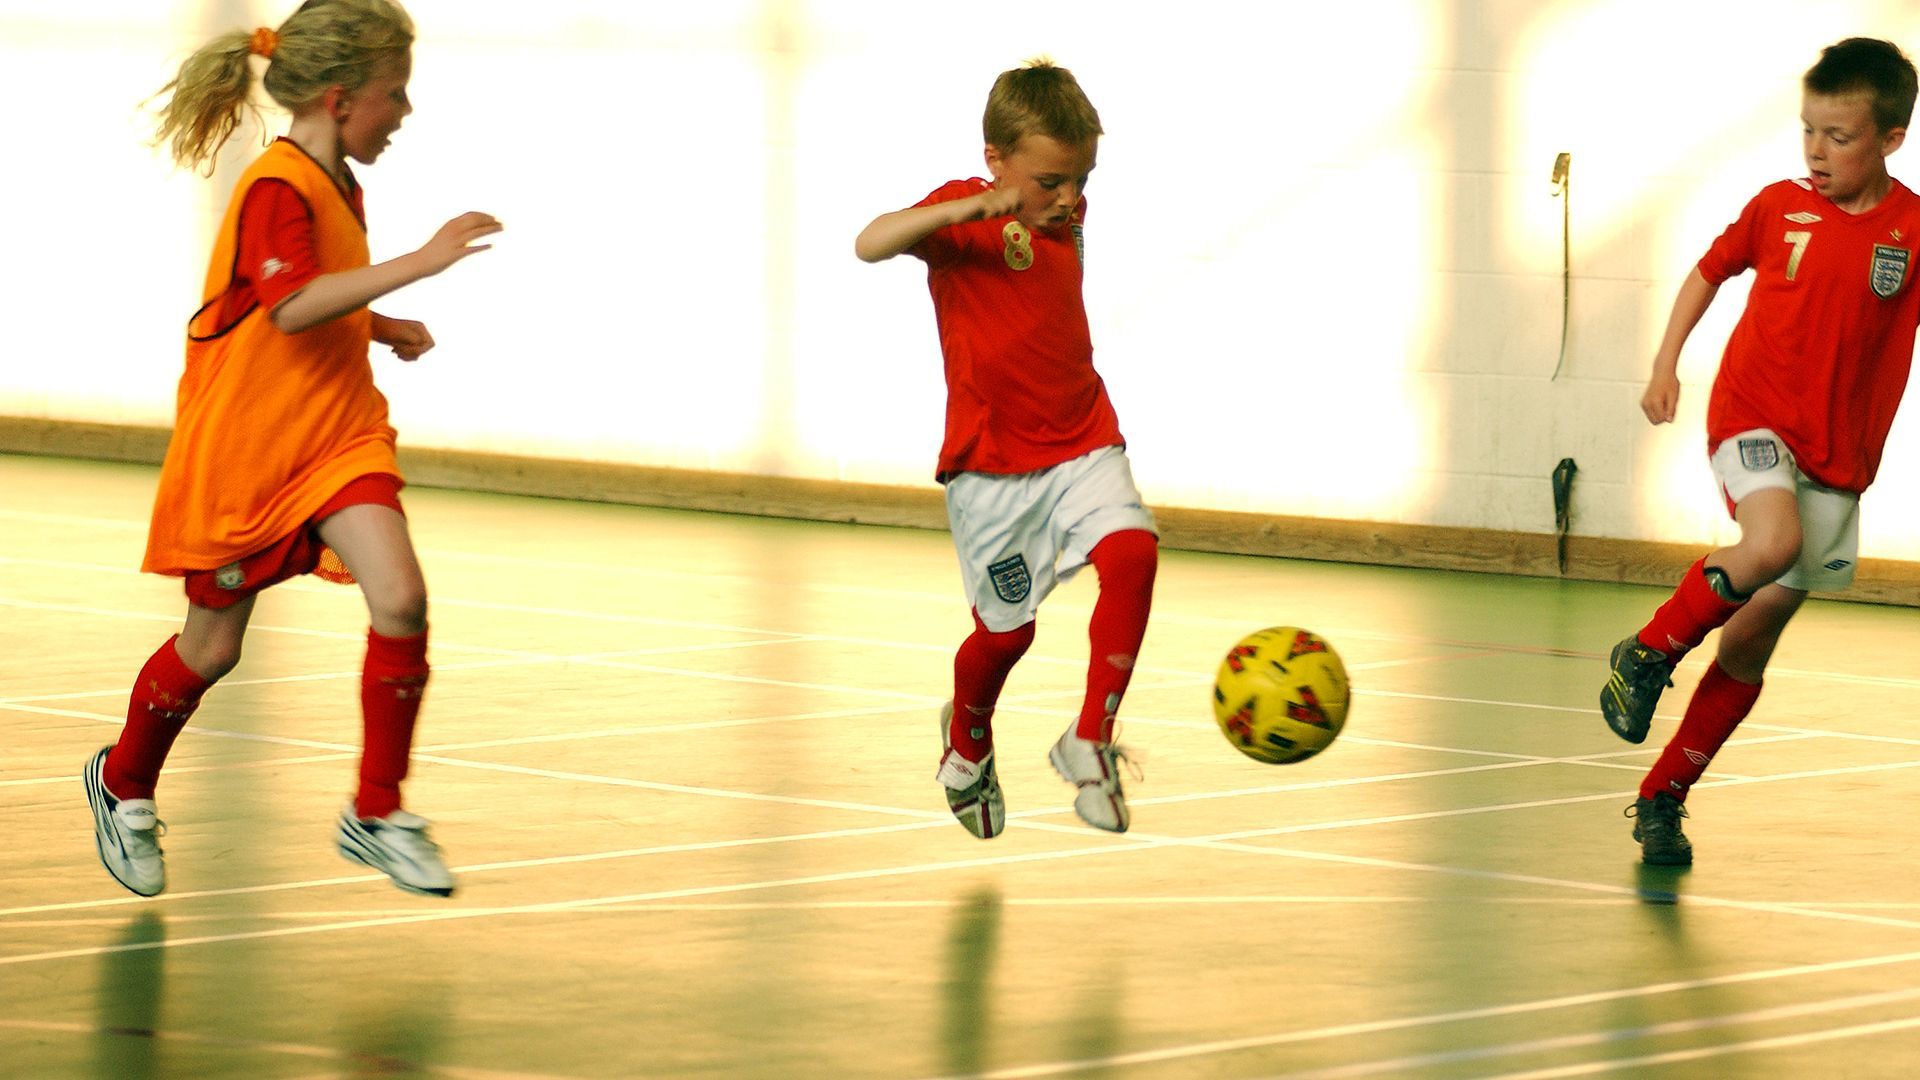 Physical Education and School Sport. School sports, Sports, Physical education